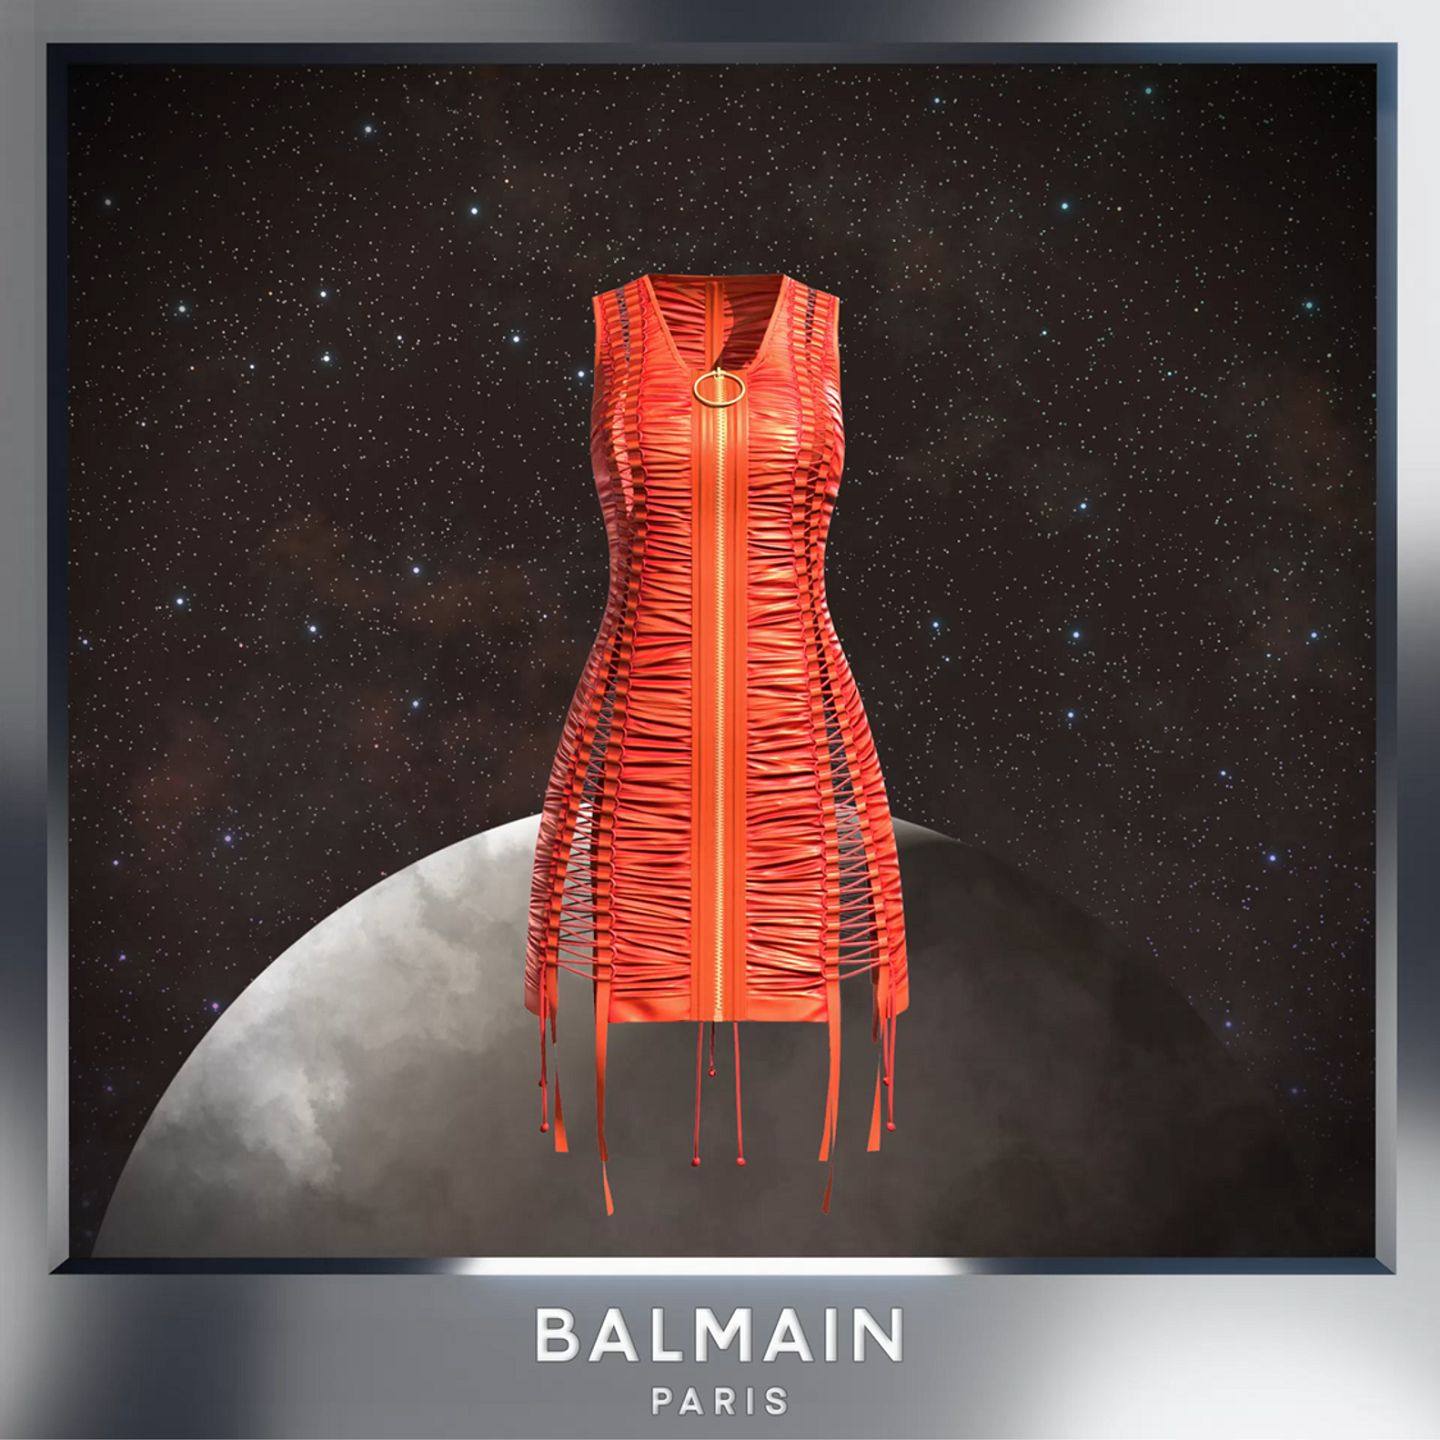 A virtual look by Balmain, part of the brand’s NFT collection. The French label, along with other luxury brands, is banking on the next fashion trend being digital.